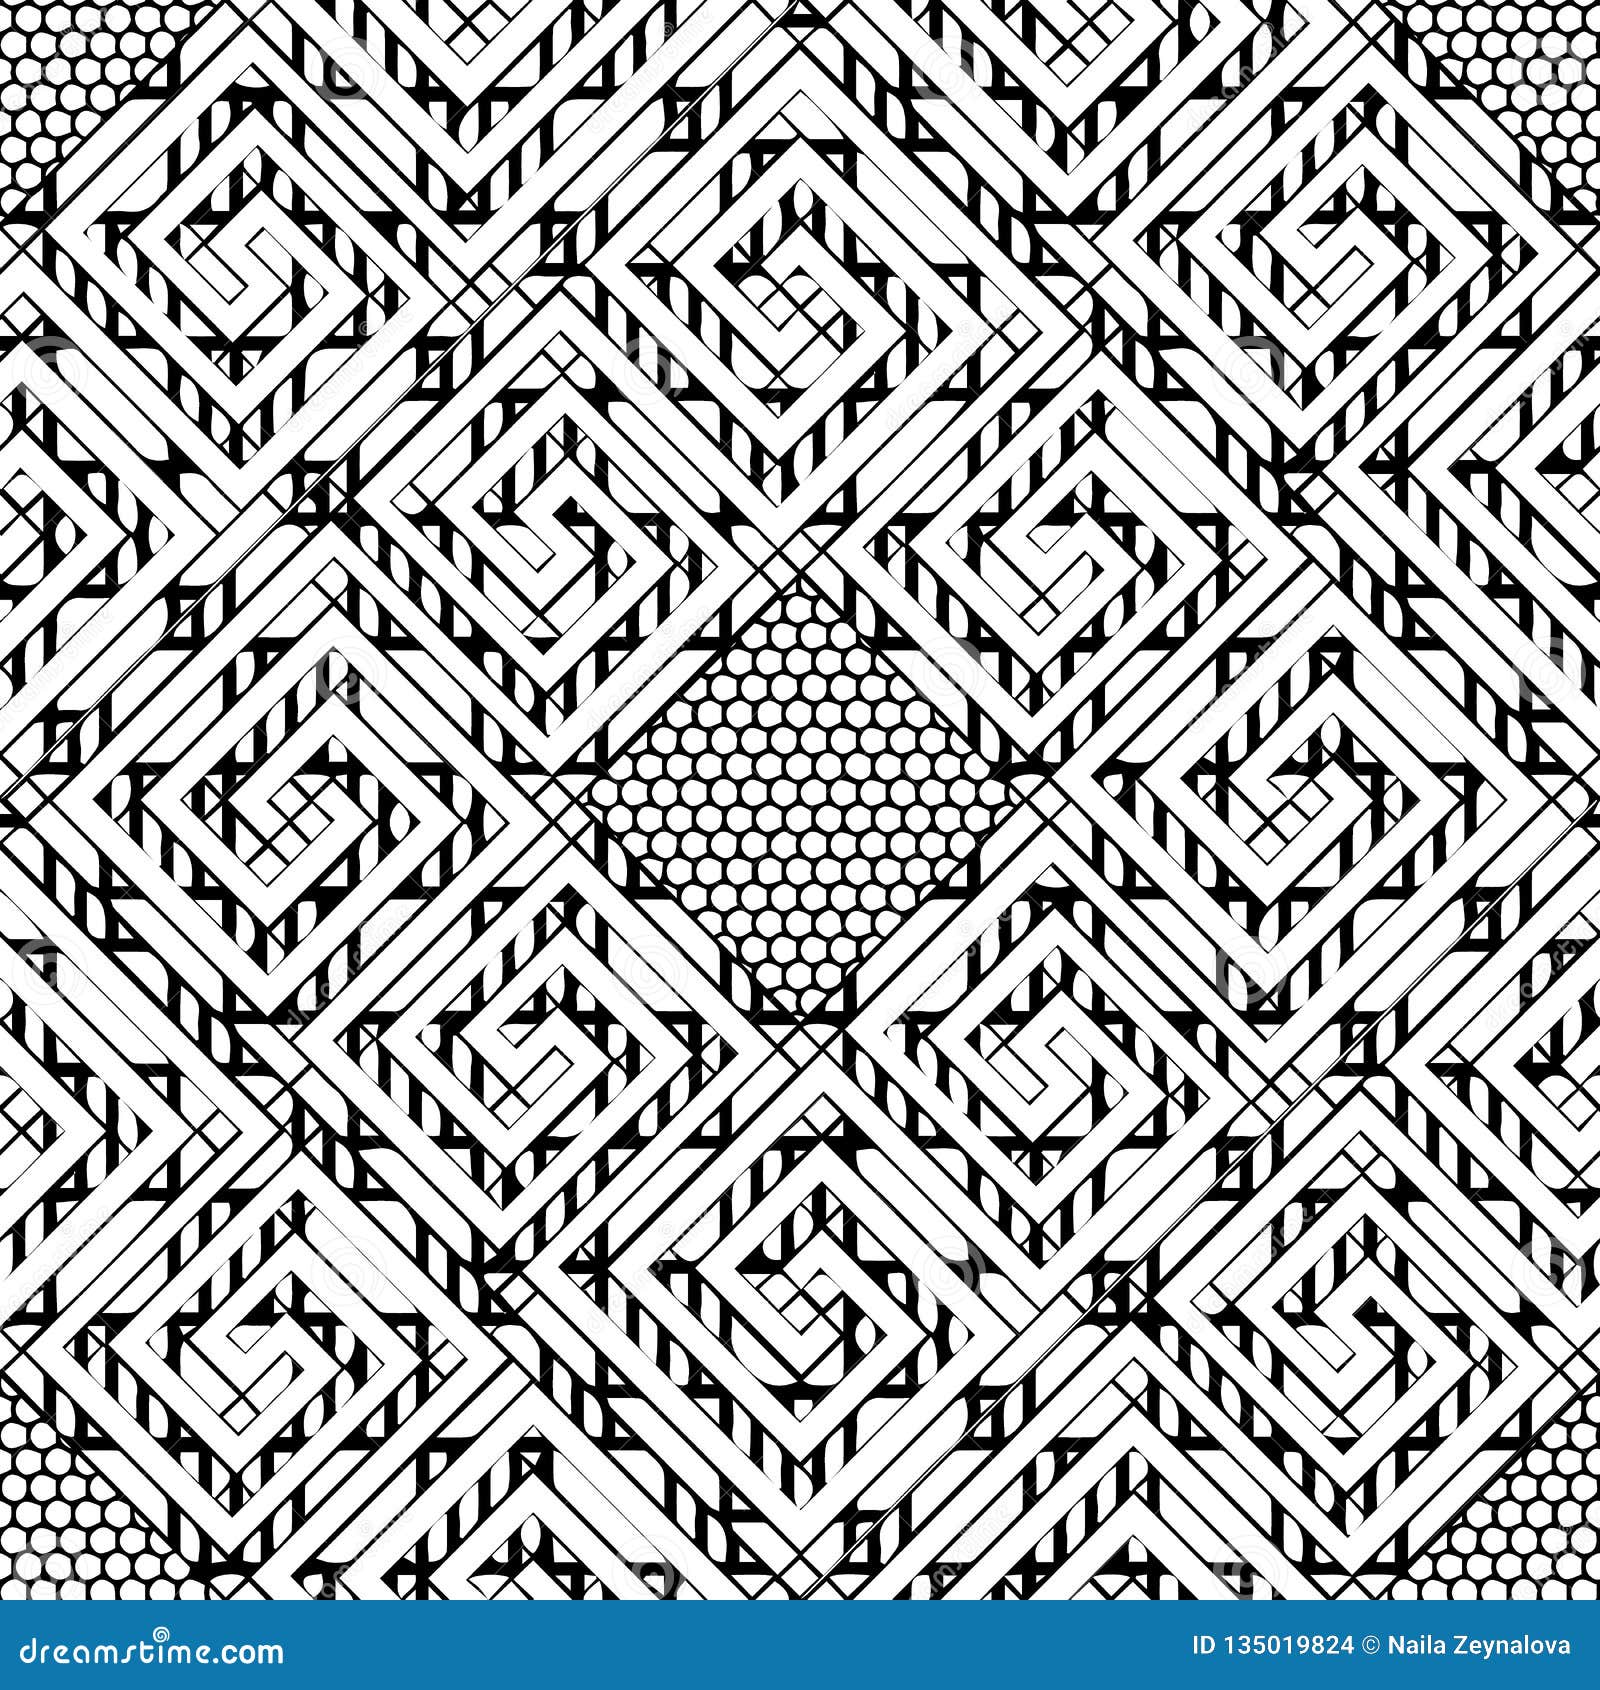 Black and White Geometric Striped Greek Vector Seamless Pattern. Lace ...